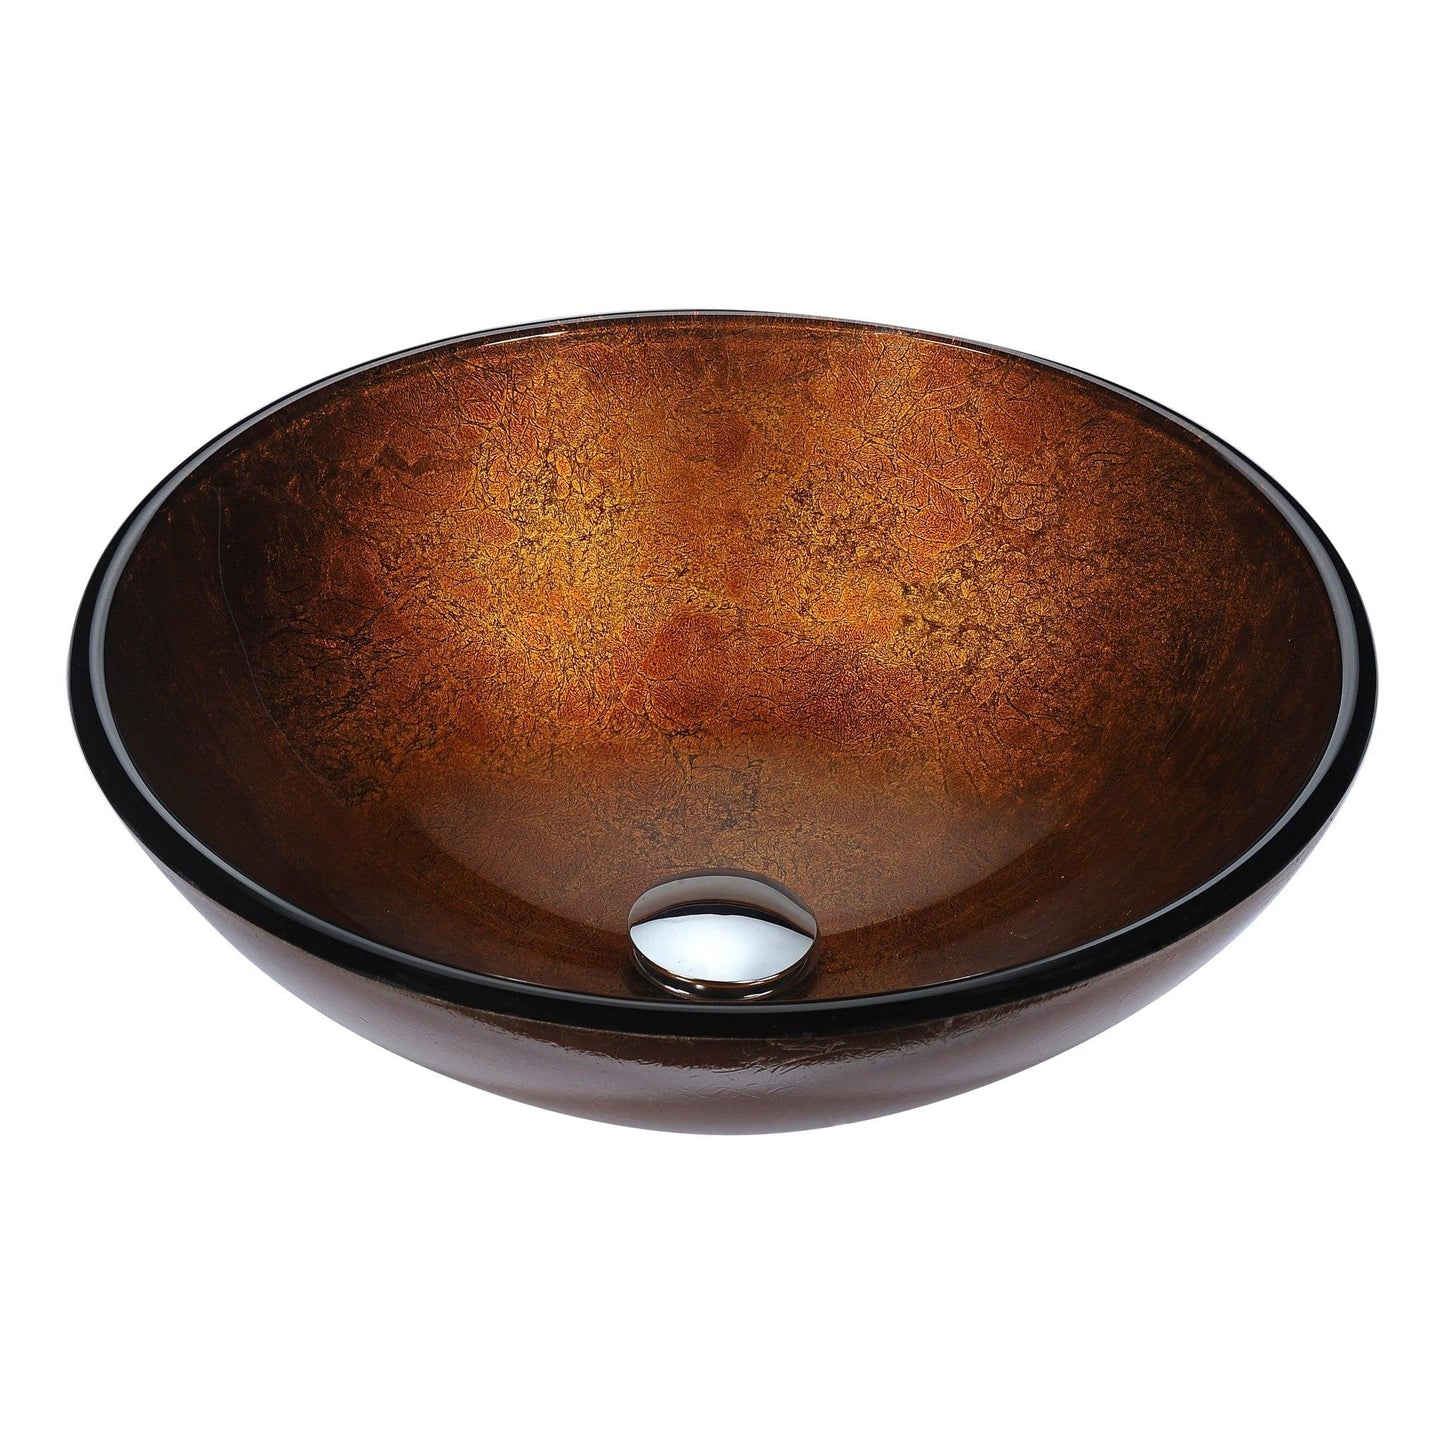 ANZZI Posh Series 17" x 17" Round Amber Gold Deco-Glass Vessel Sink With Polished Chrome Pop-Up Drain